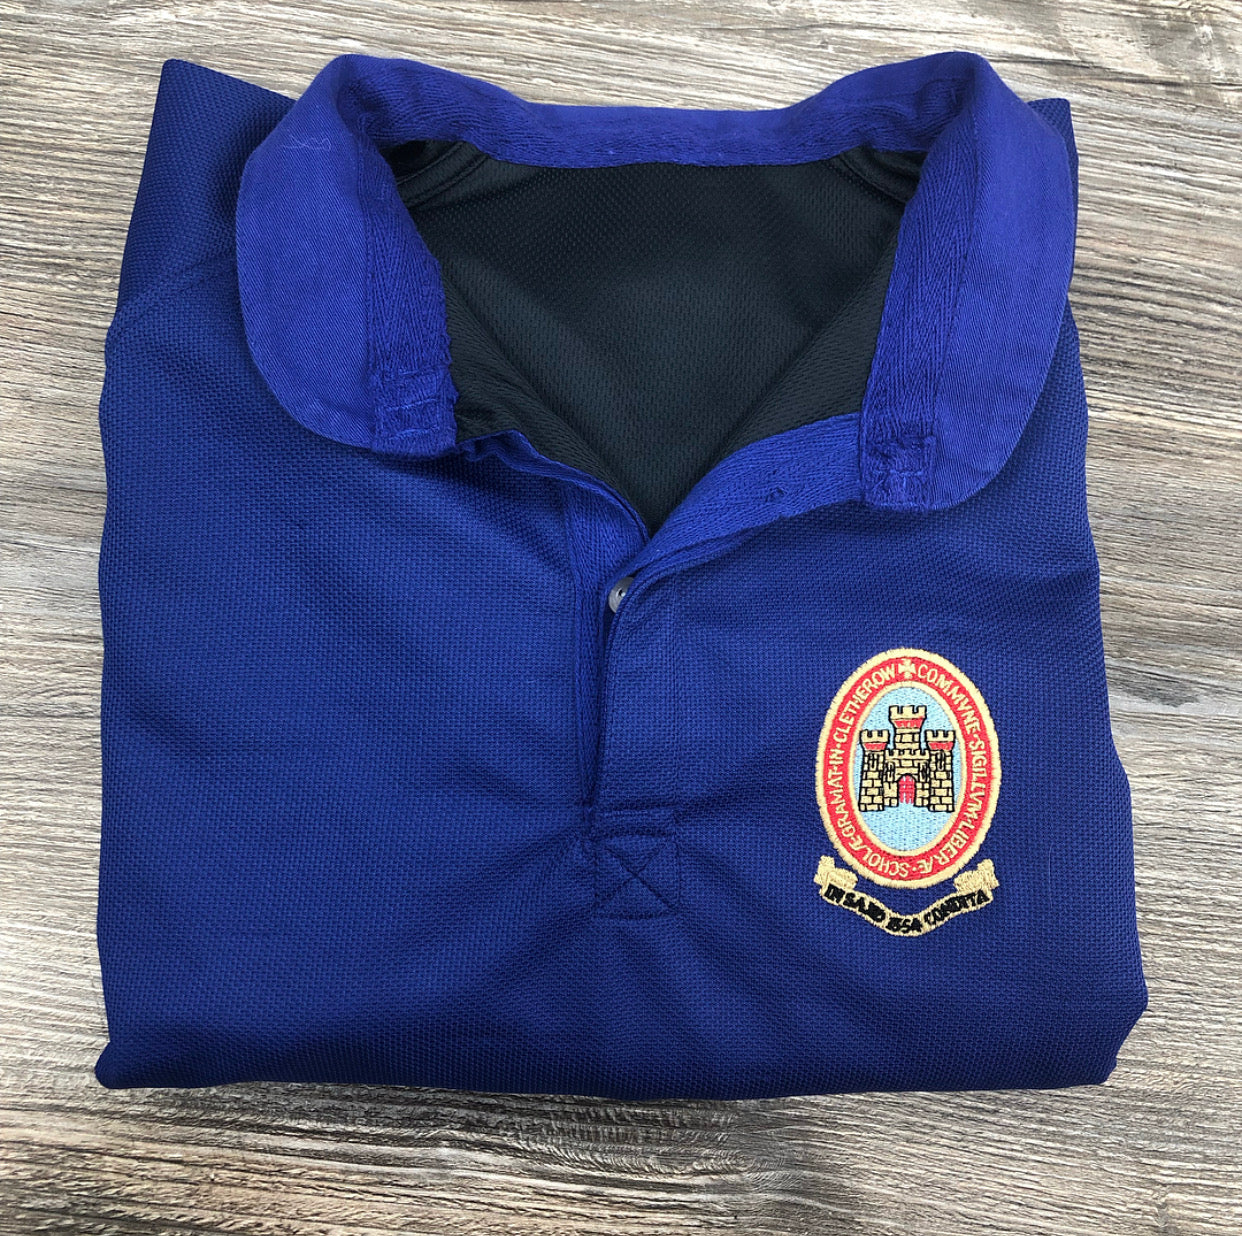 DISCONTINUED - CRGS Rugby Shirt